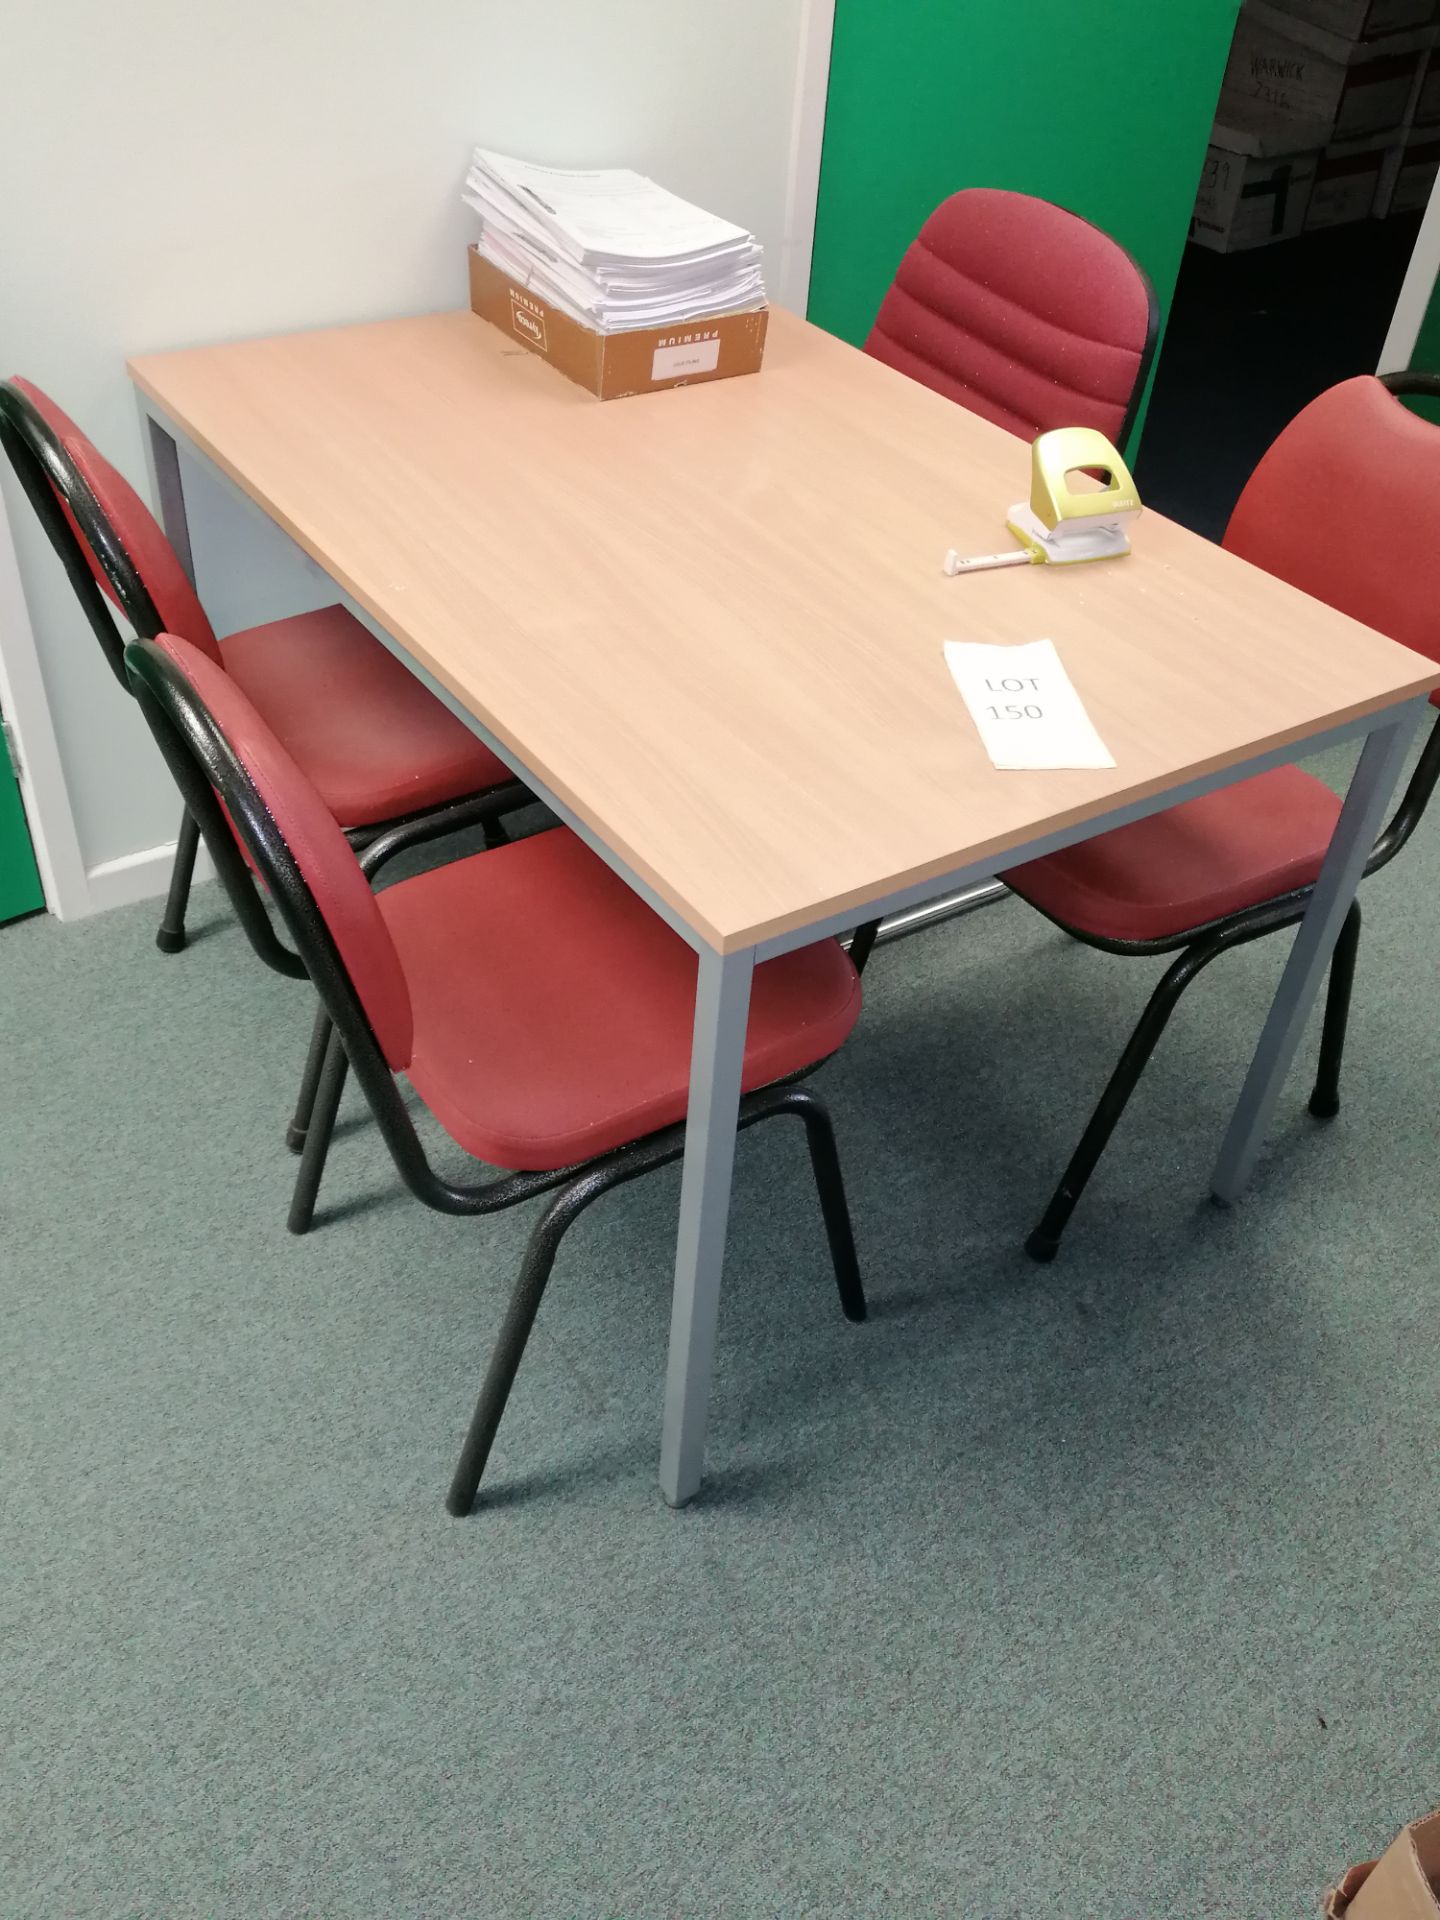 Office Desk & 4 Chairs (Does Not Include Contents) - Image 2 of 2